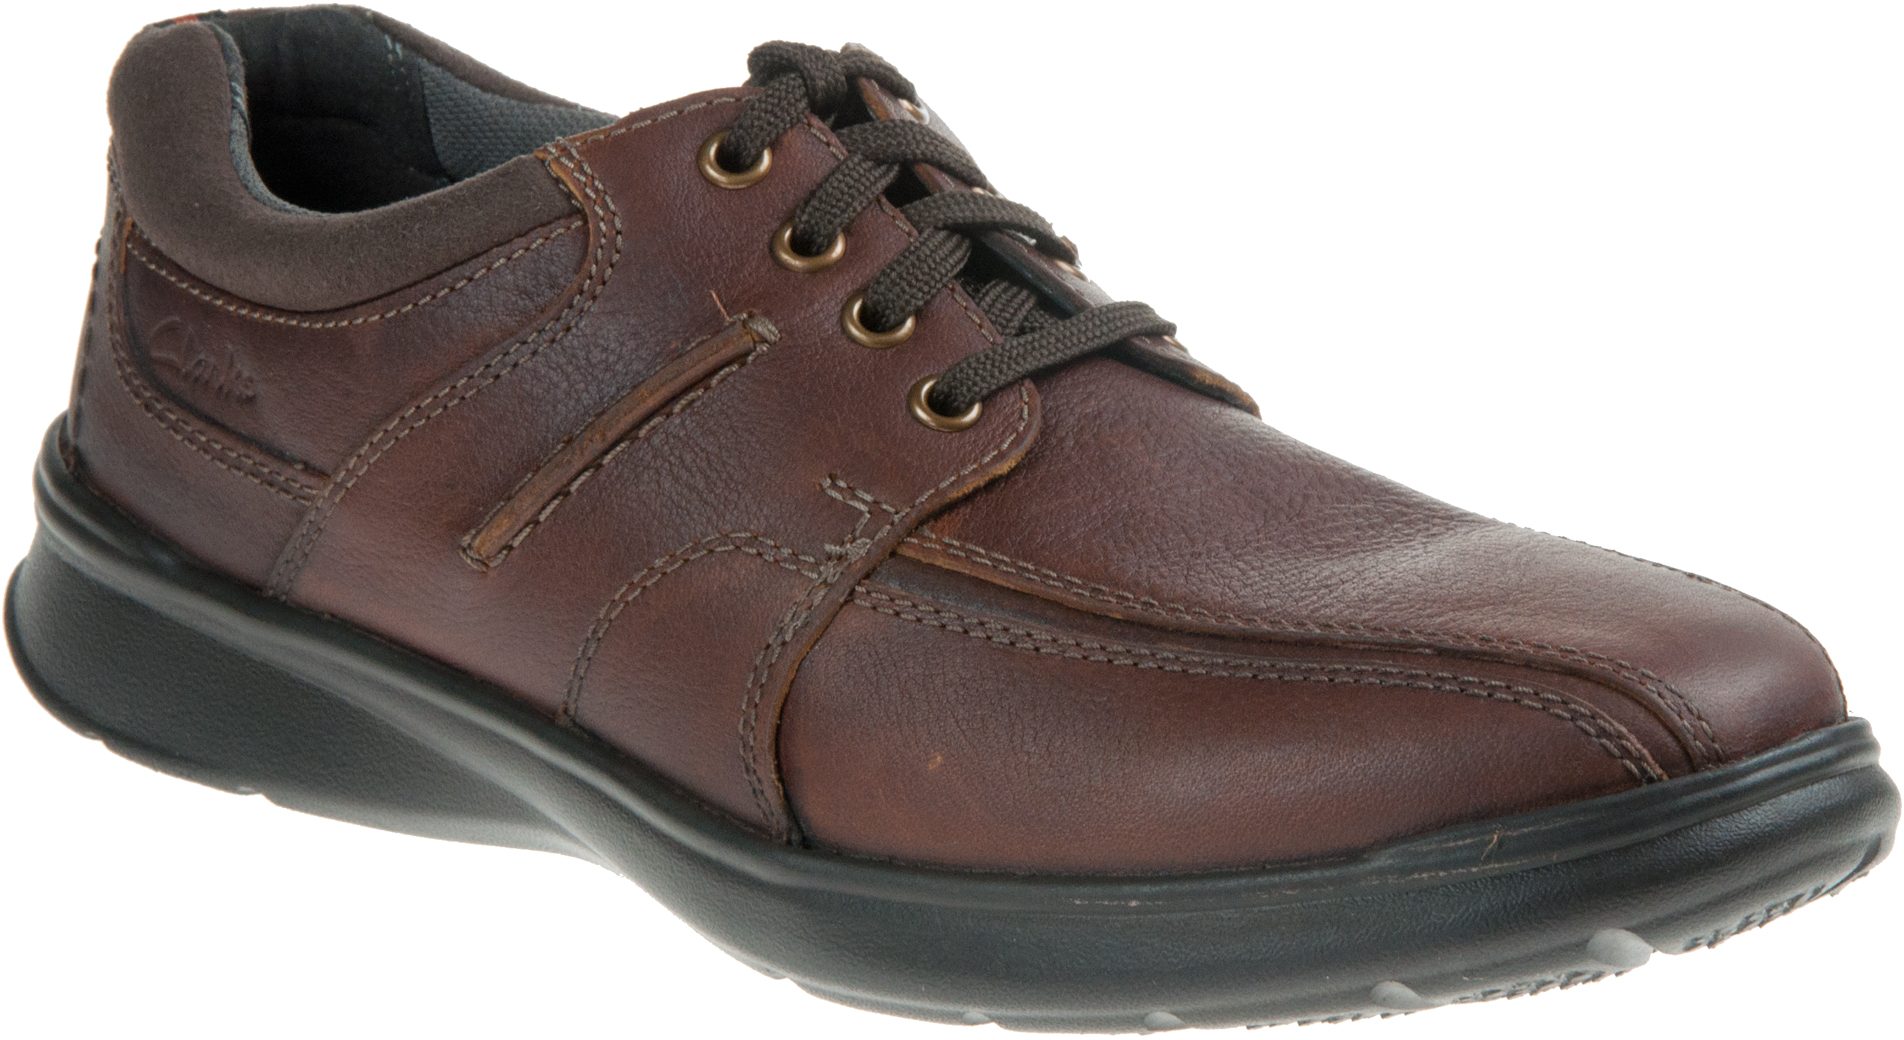 Clarks Cotrell Walk Tobacco 26119616 - Casual Shoes - Humphries Shoes